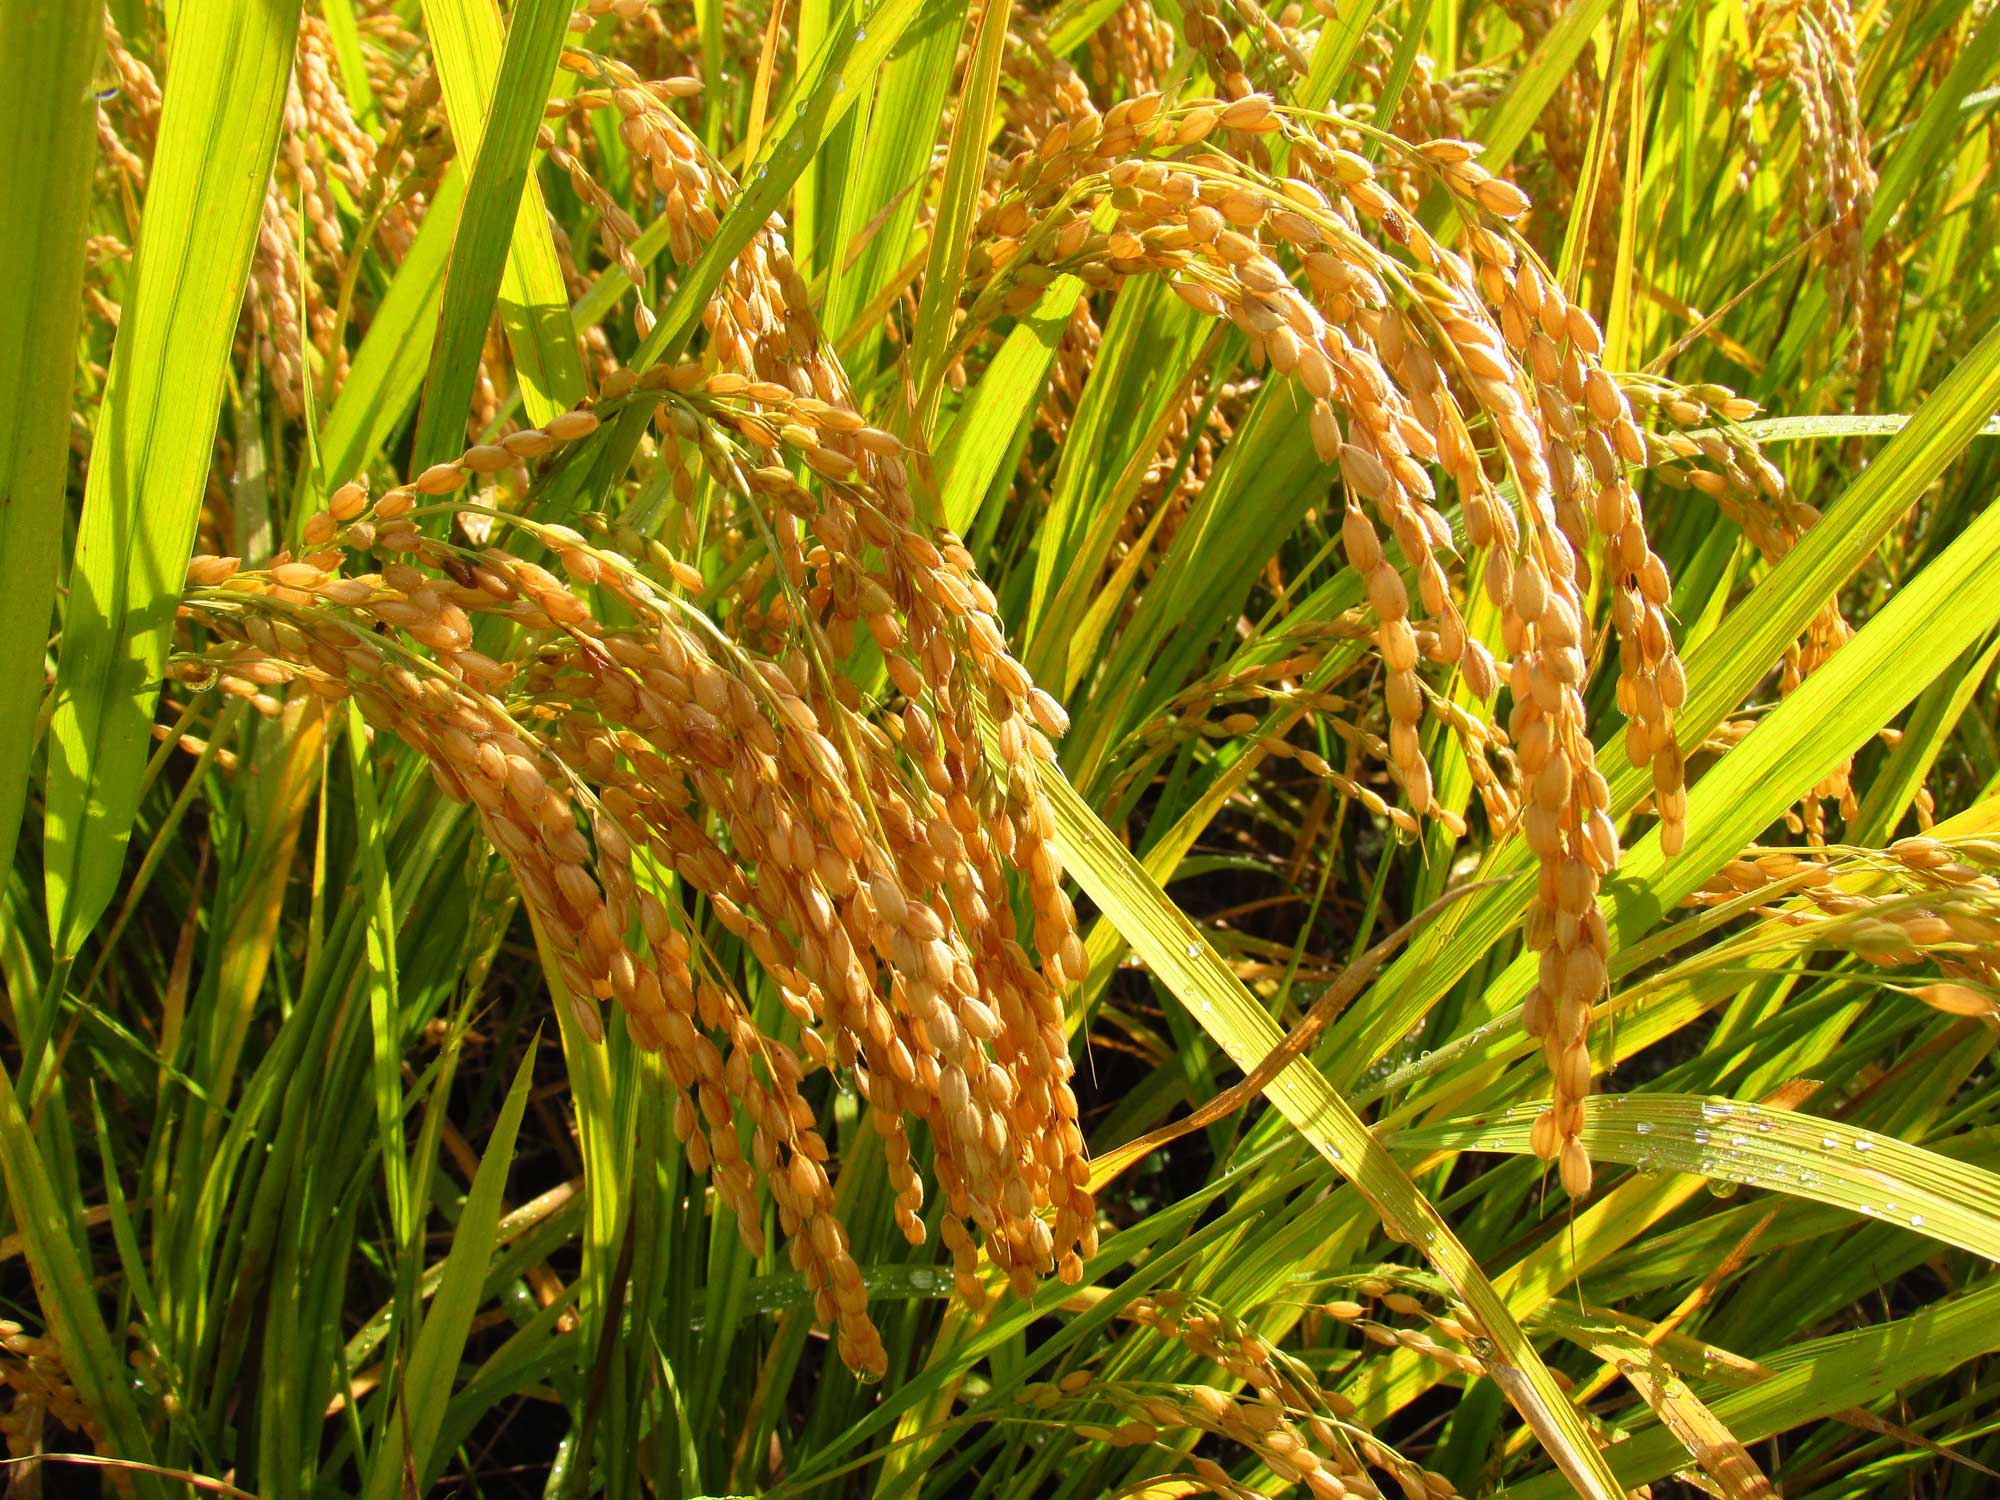 Photograph of rice cultivated in Japan. The photo shows ears of rice arching downward from the tips of culms. The plants also bear linear green leaves.